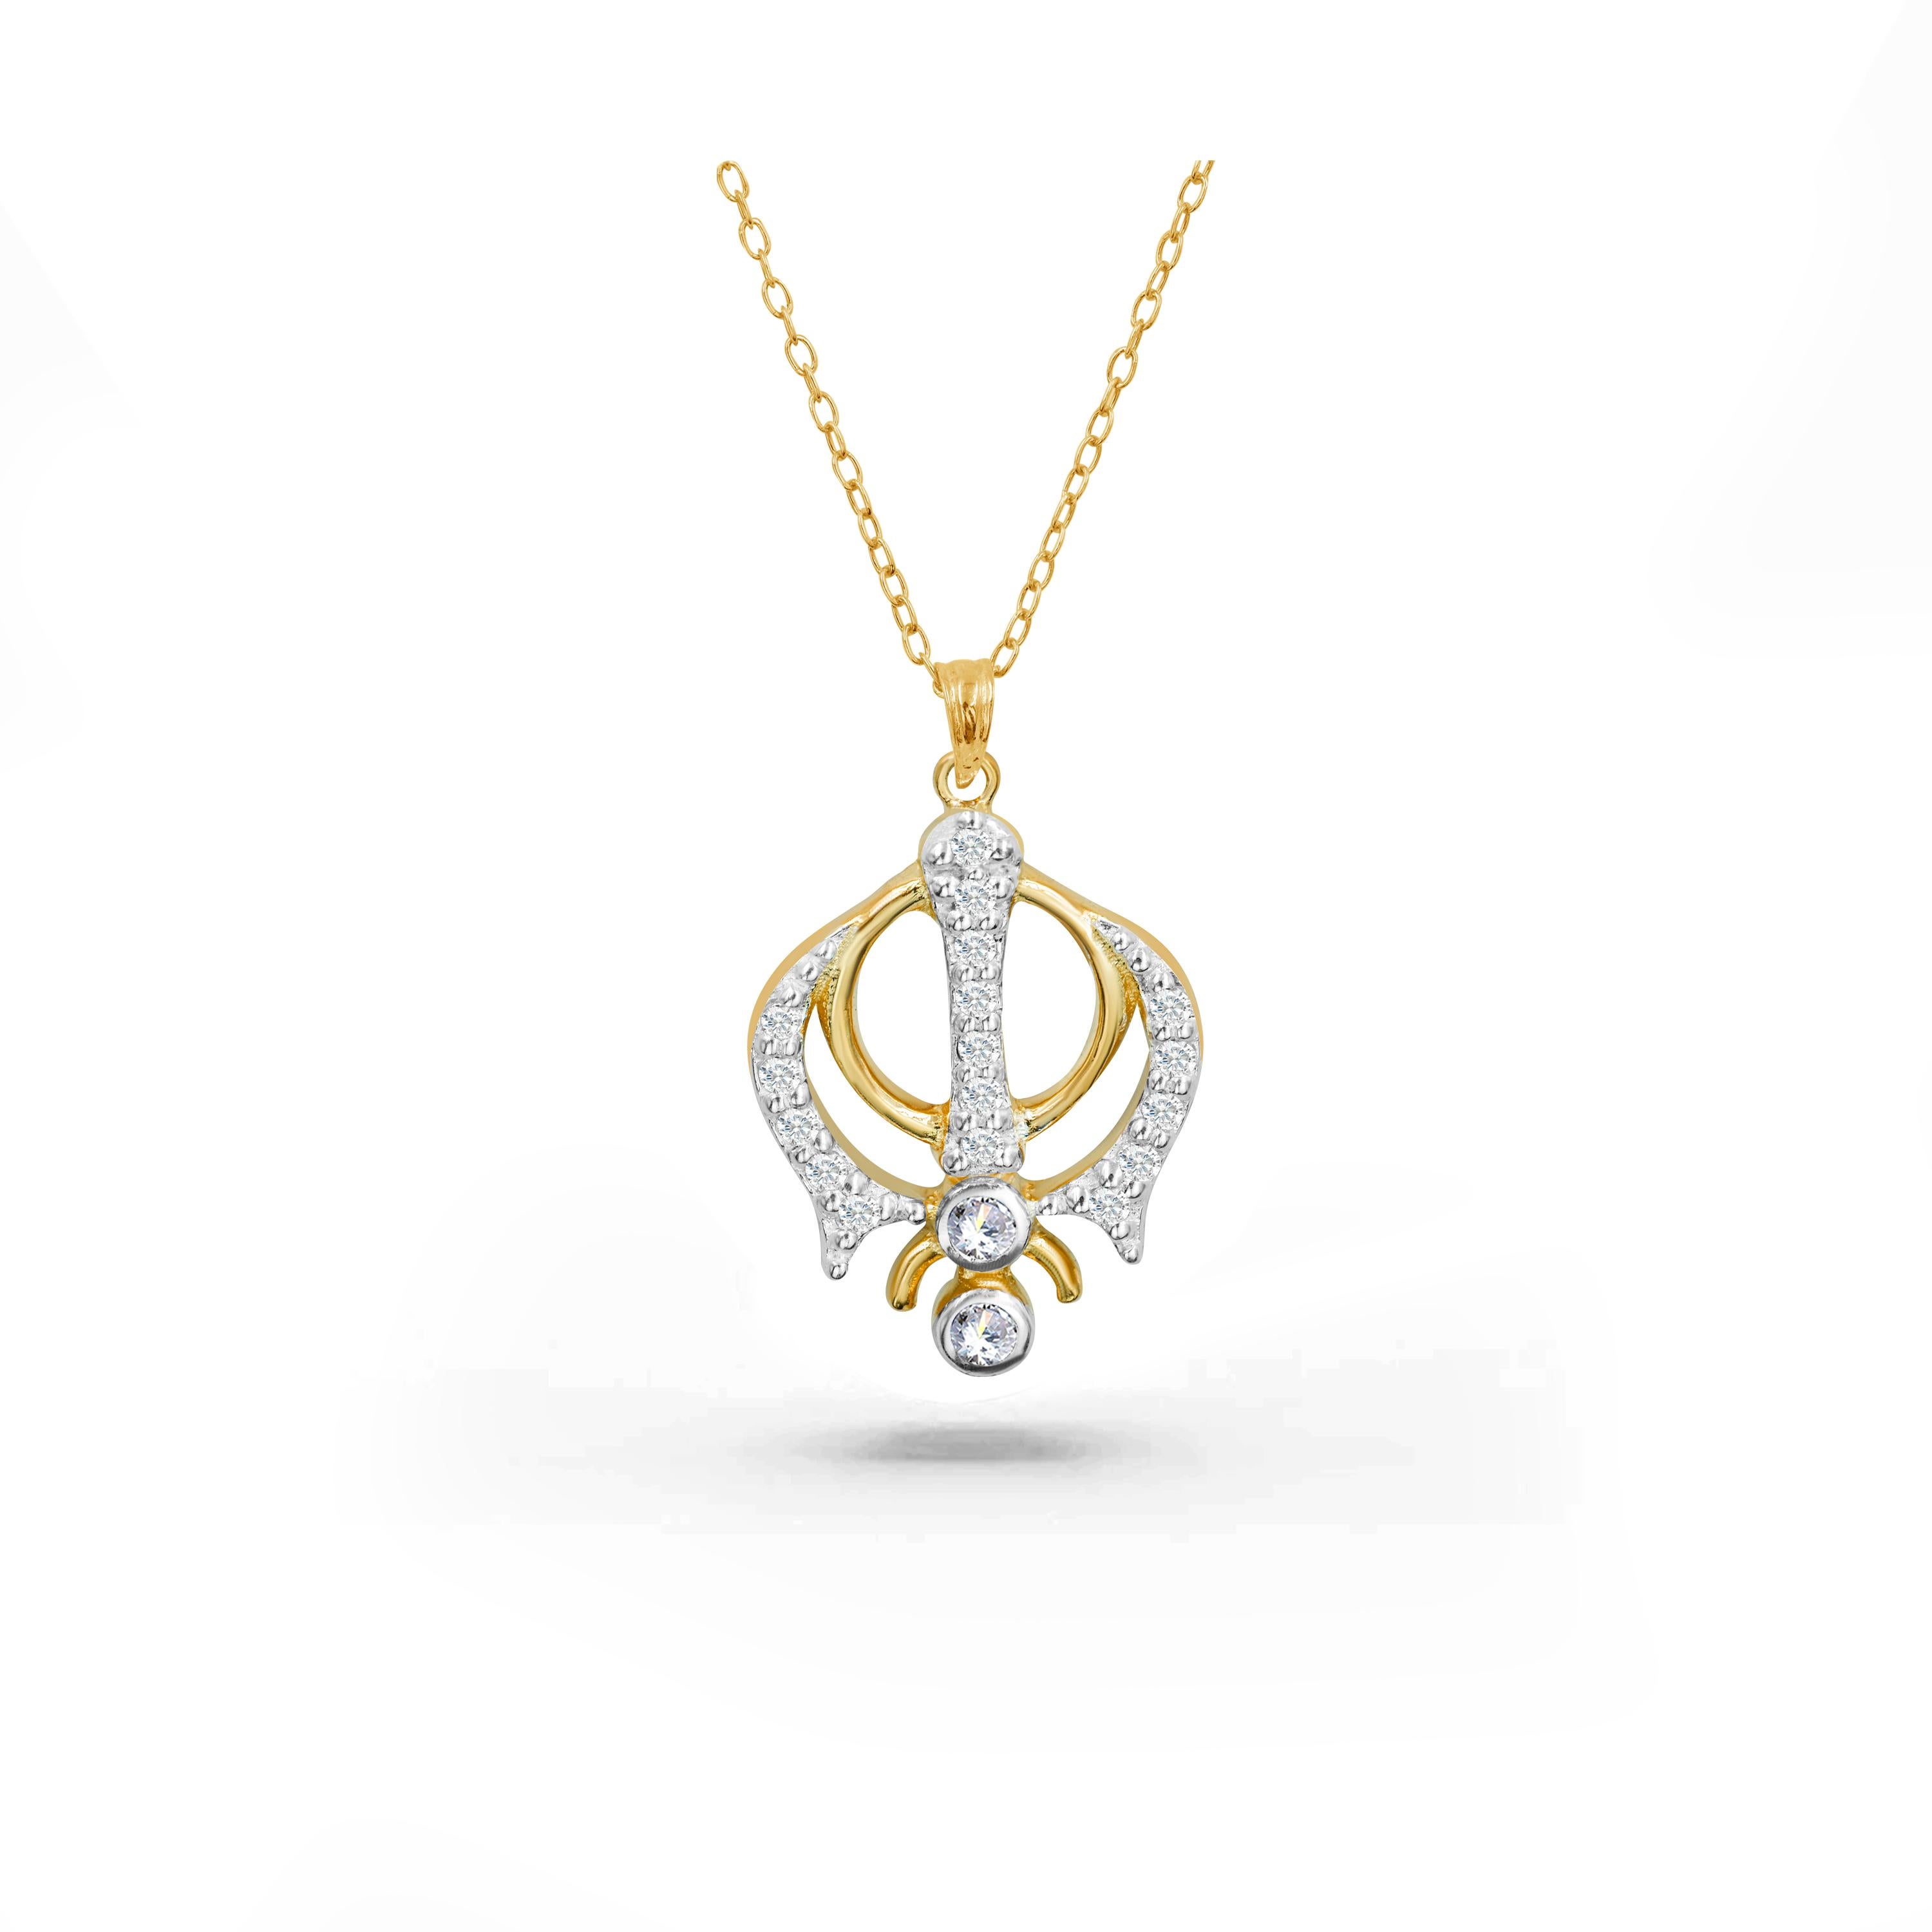 The handcrafted Khanda diamond necklace is perfect everyday wear to bring inner peace and spirituality. This beautiful sikhism religious necklace is a statement piece. This sikh necklace can be customized in the gold color and karat of your choice.